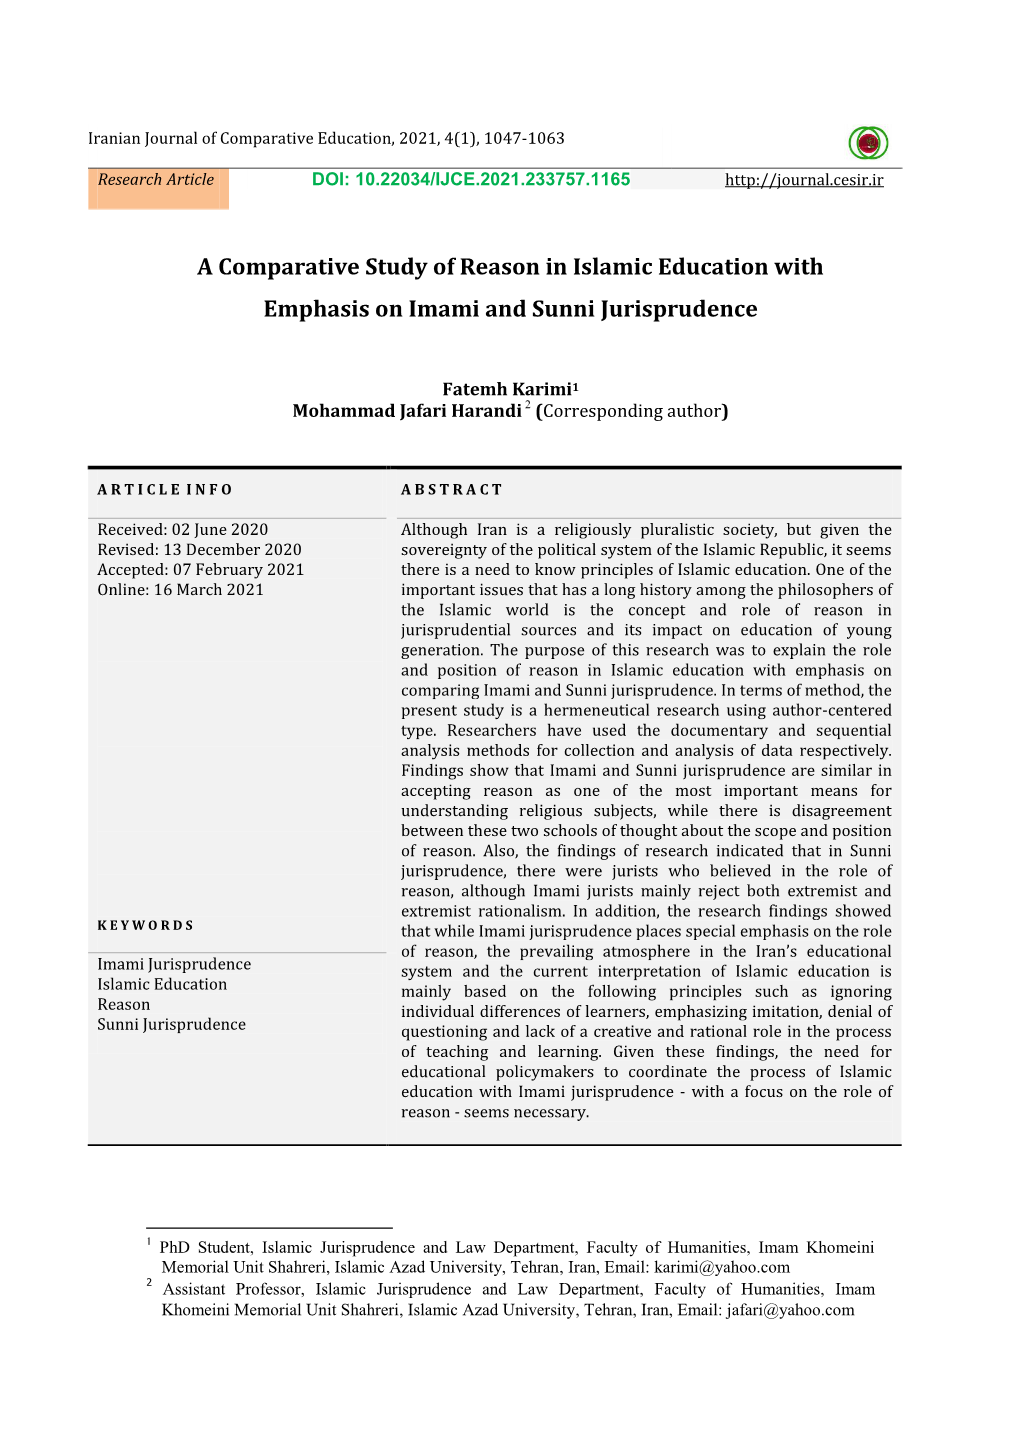 A Comparative Study of Reason in Islamic Education with Emphasis on Imami and Sunni Jurisprudence